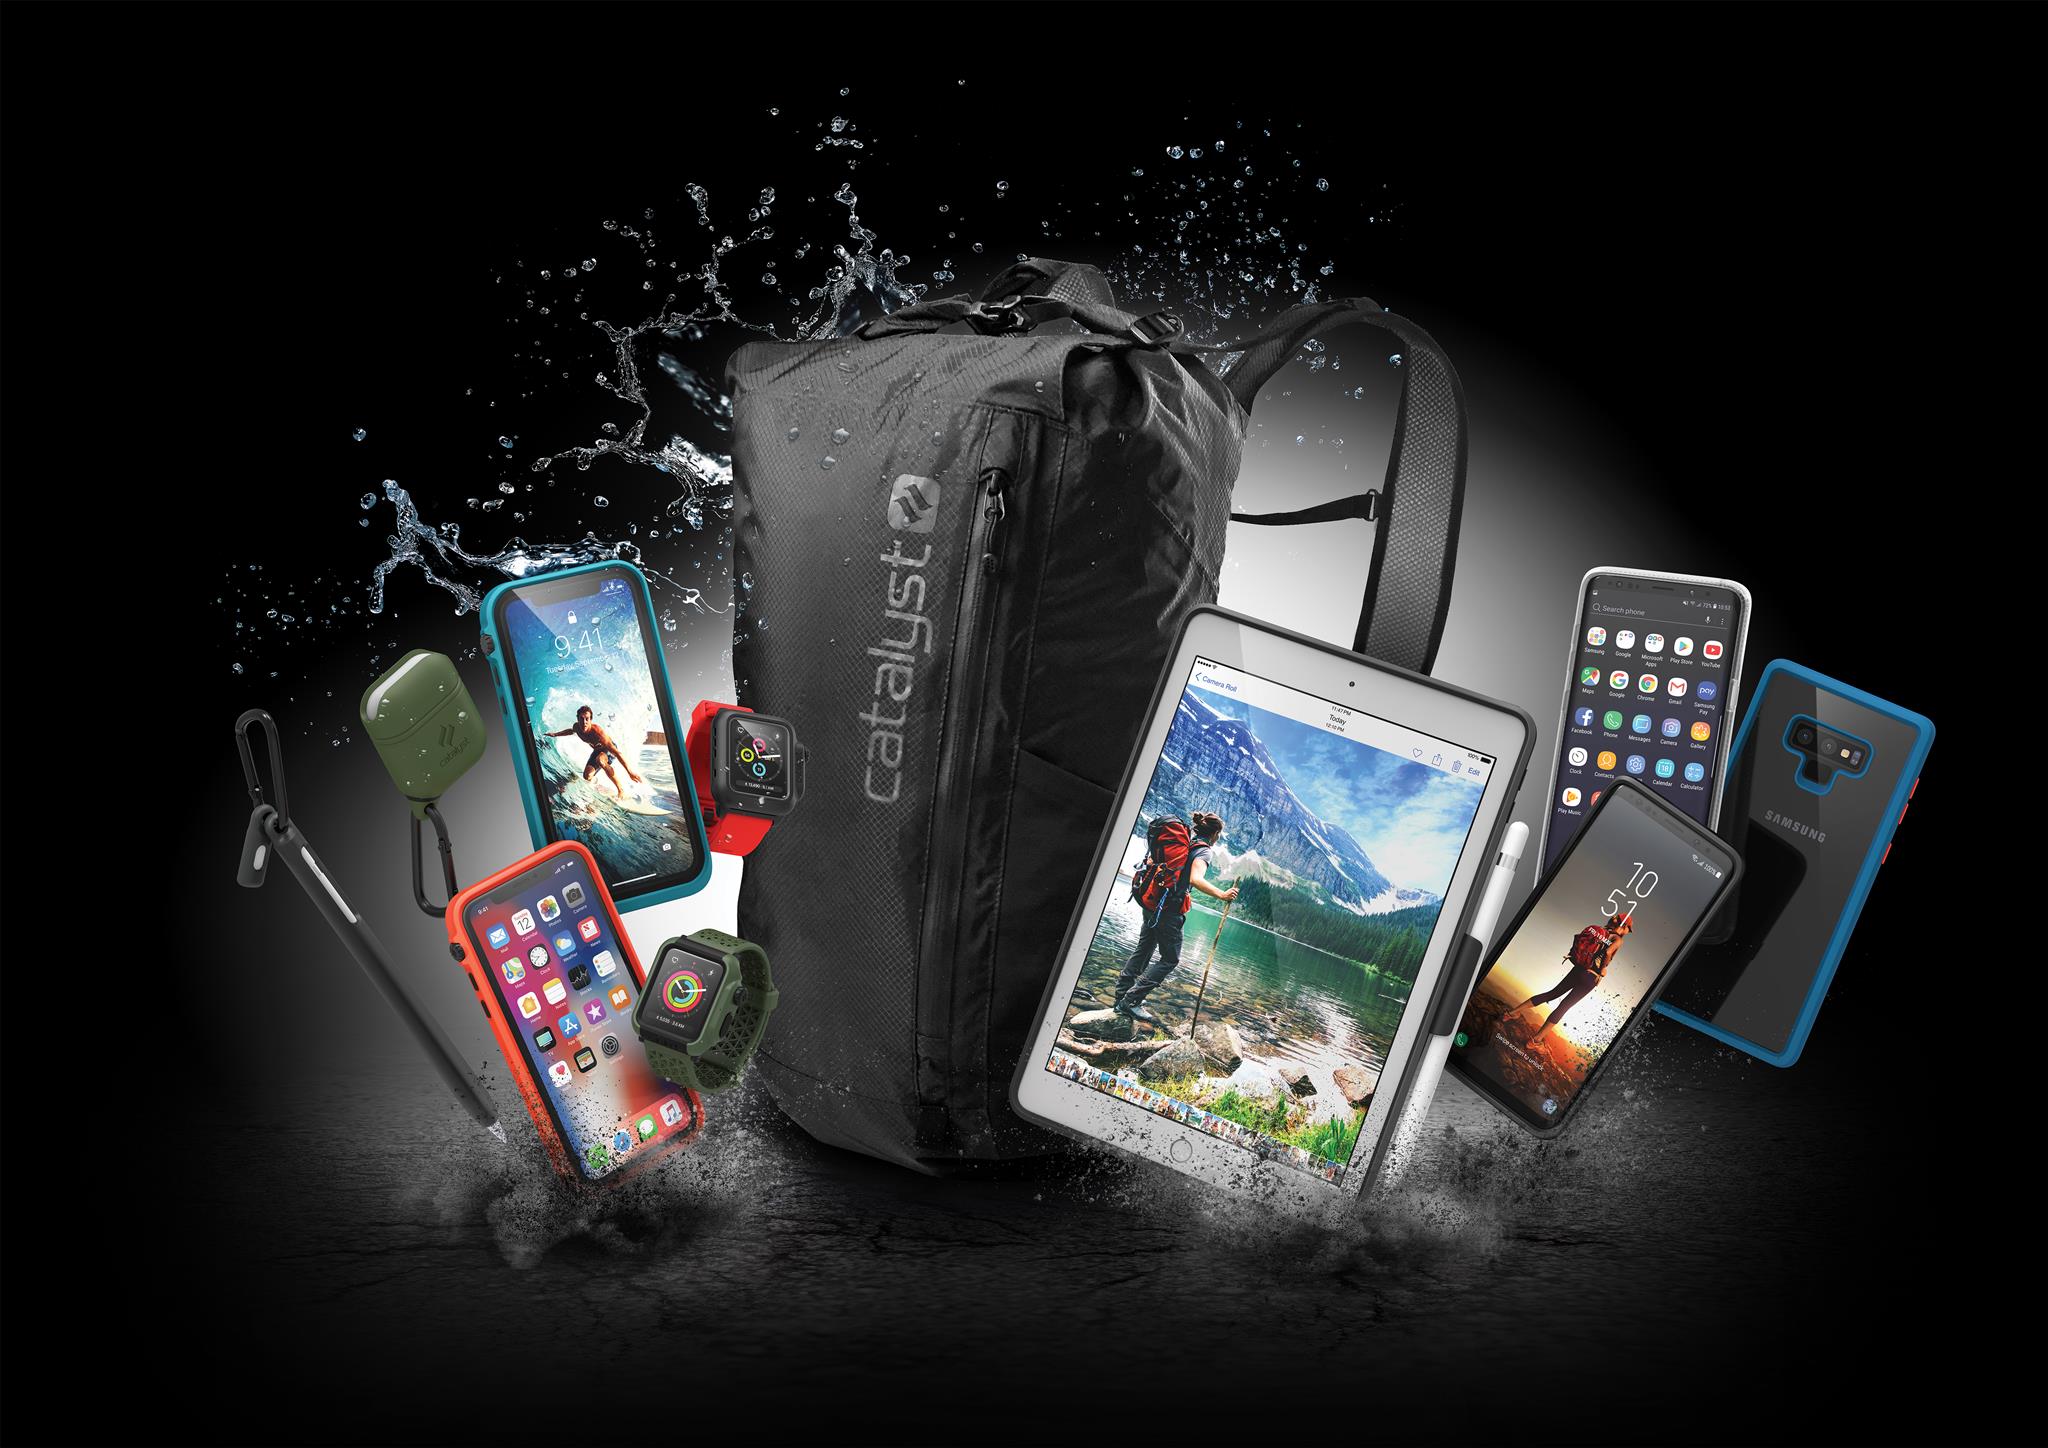 CATALYST INTRODUCES VERSATILE WATERPROOF BACKPACK AND IMPACT PROTECTION CASES FOR GALAXY NOTE 9 AND NEW 9.7-INCH IPAD